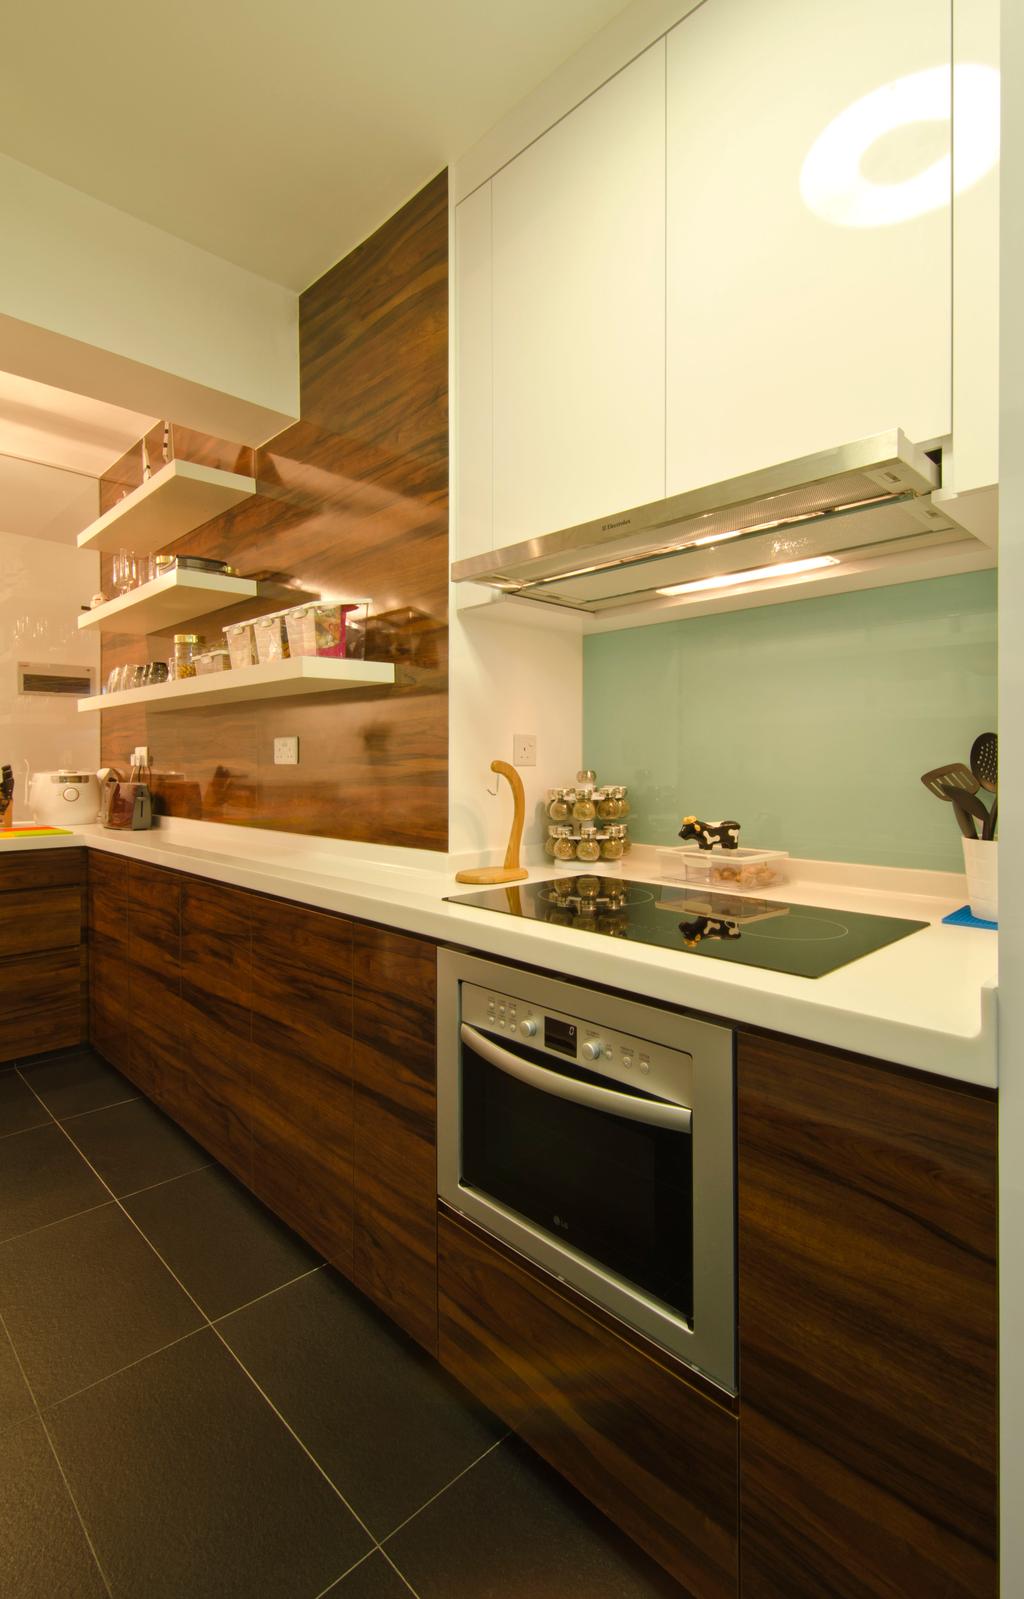 Contemporary, HDB, Kitchen, 27 Ghim Moh Link, Interior Designer, Fifth Avenue Interior, Induction Cooker, Exhaust Hood, Wood Theme, Brown Cabinet, Wall Mounted Shelves, Wall Mounted Mirror, Shelves, White Cabinet, Laminates, Building, Housing, Indoors, Loft, Interior Design